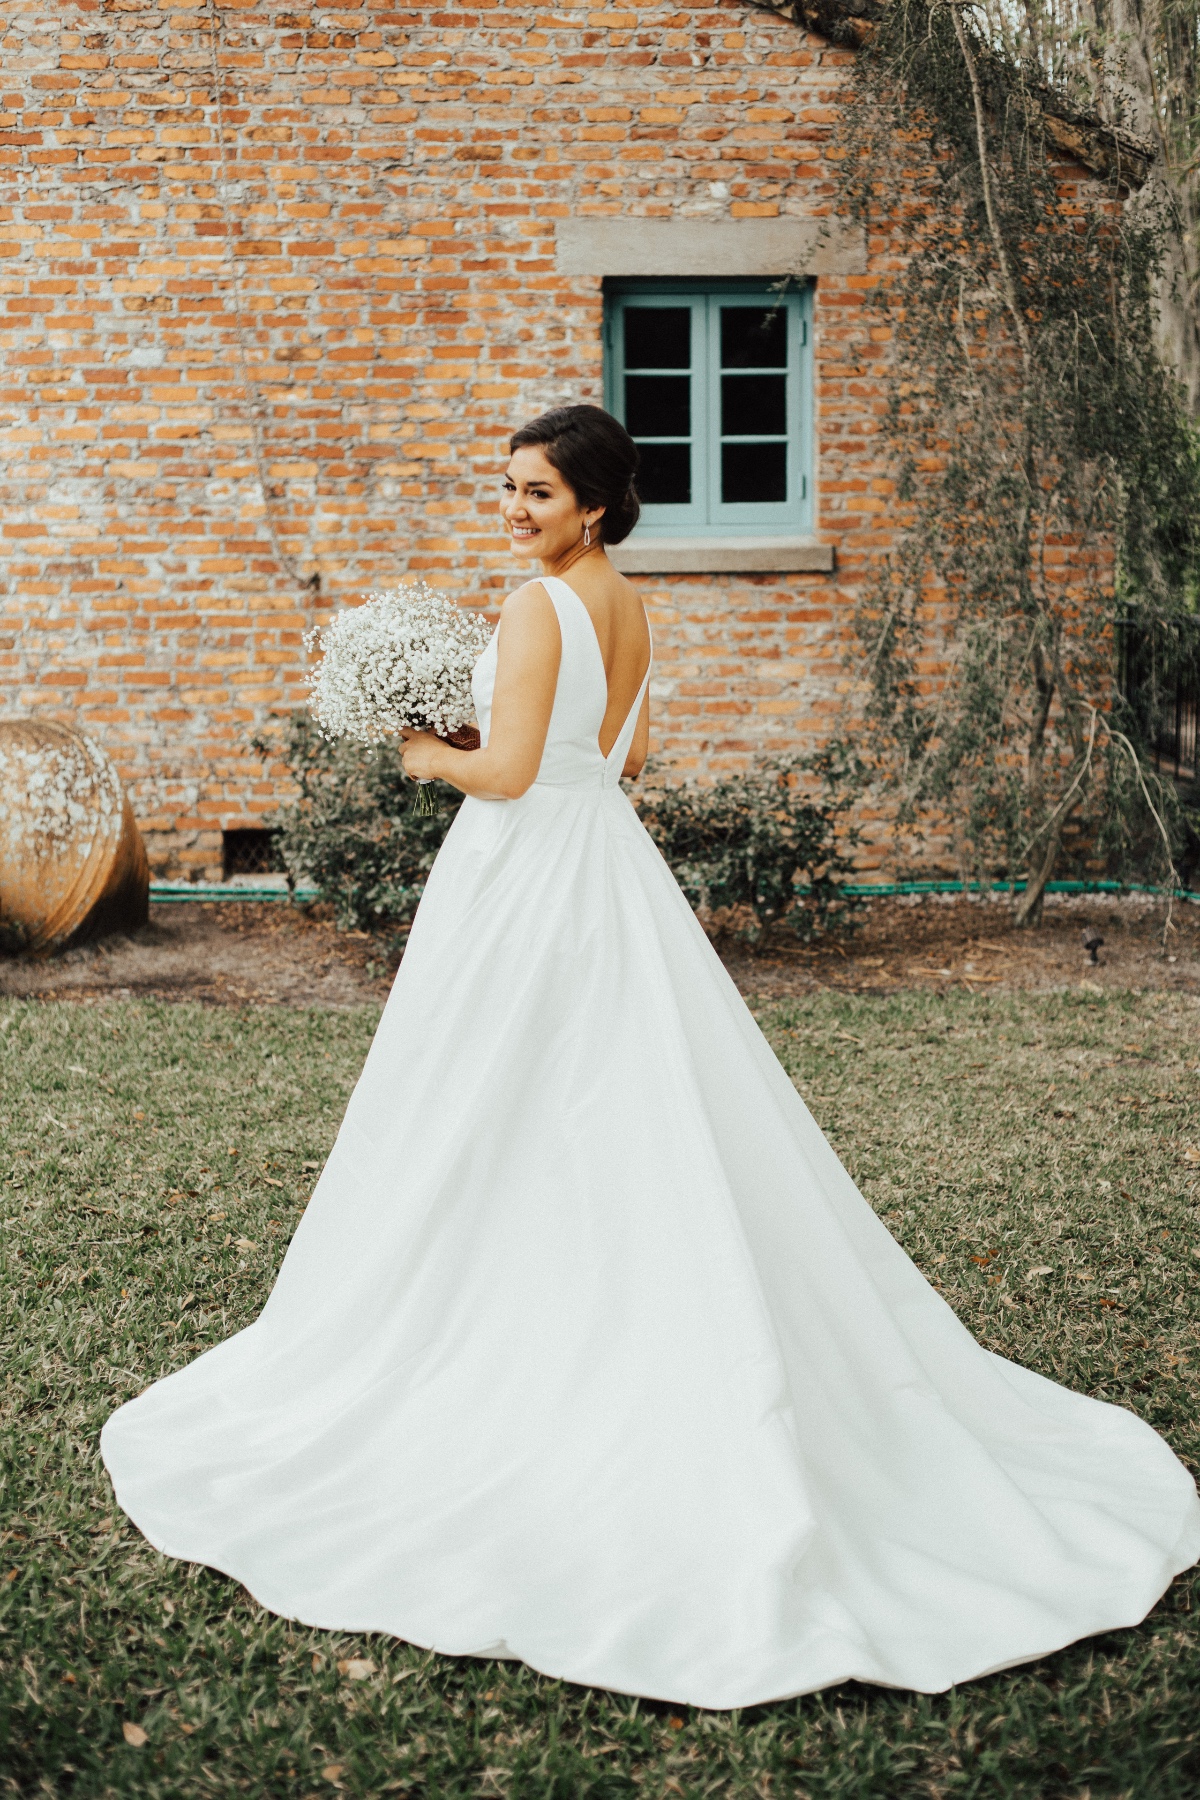 Classic Bridal Gown with thicker straps holding a baby's breath bouquet